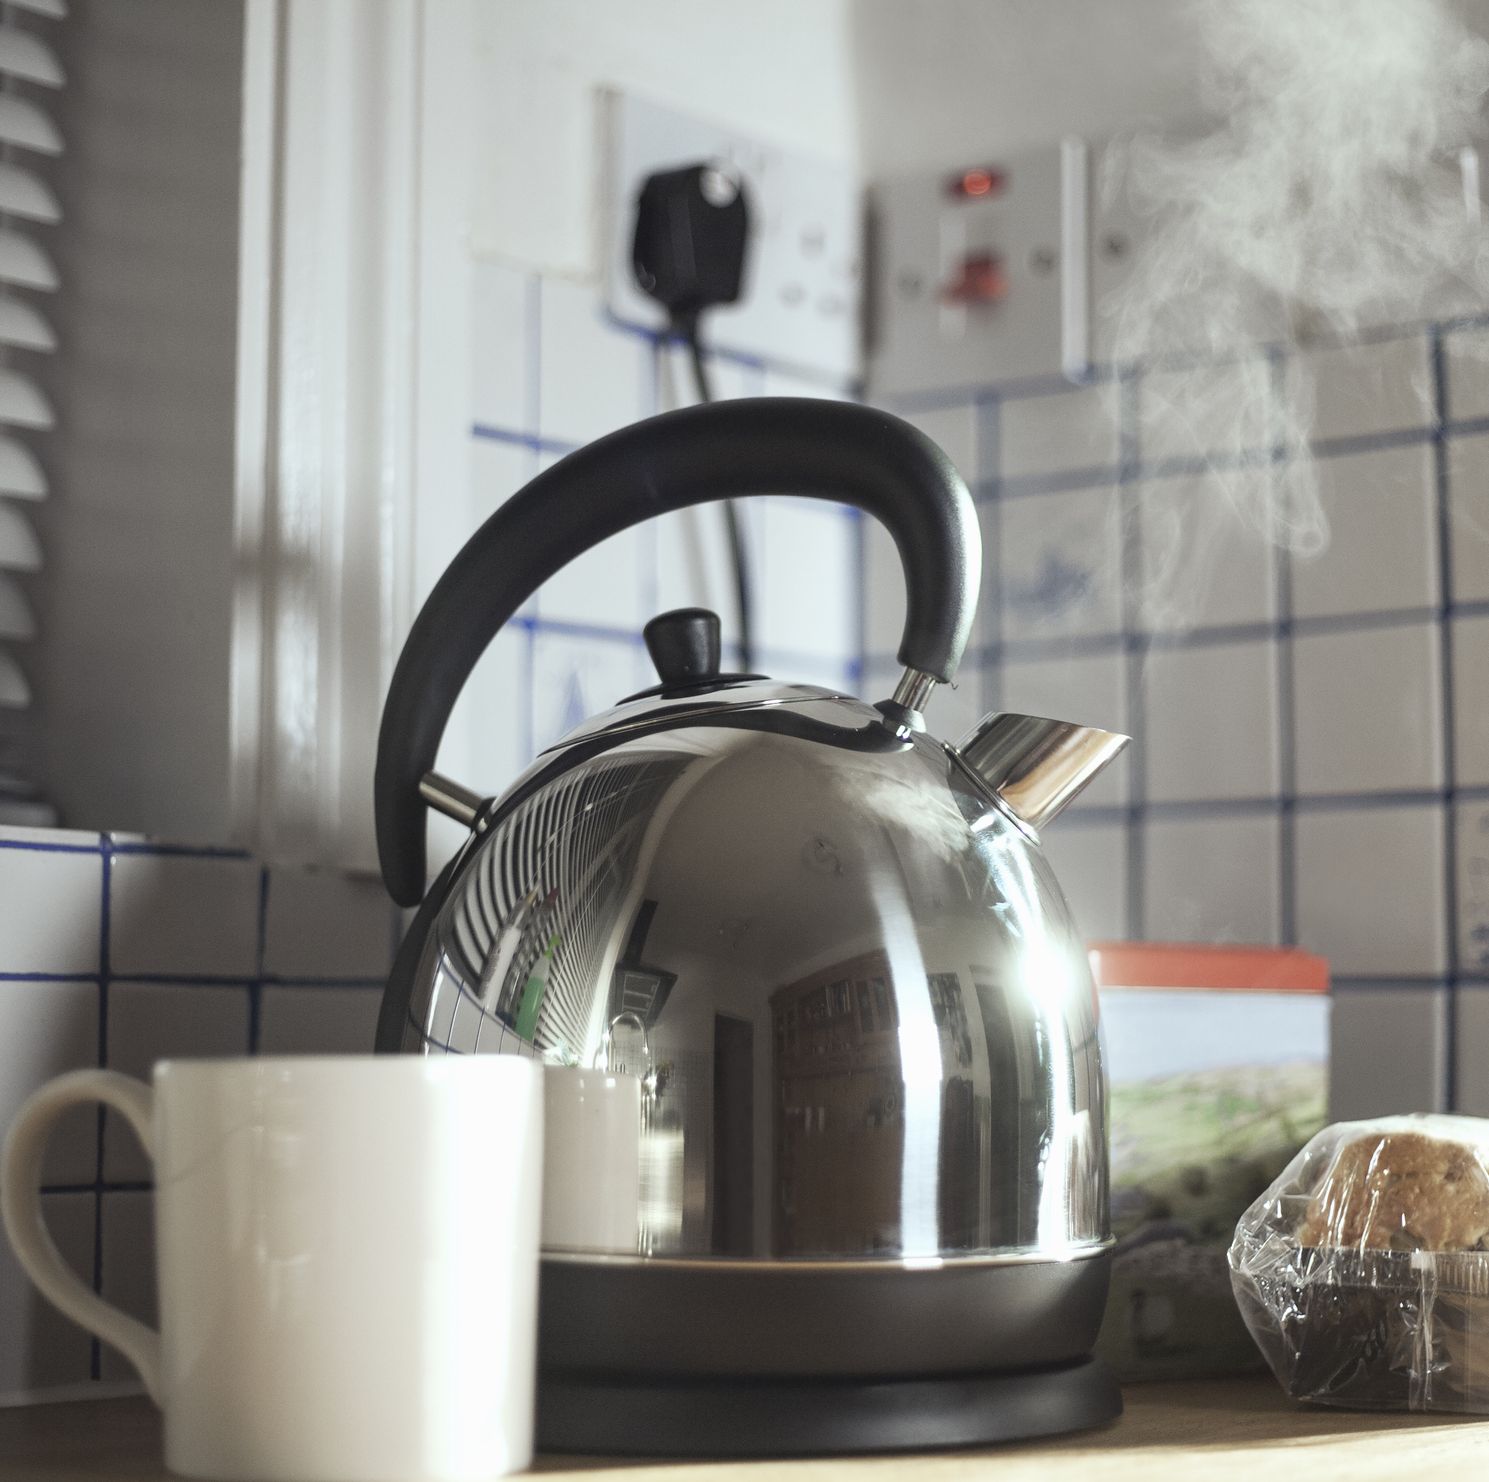 How to Descale a Tea Kettle the Right Way